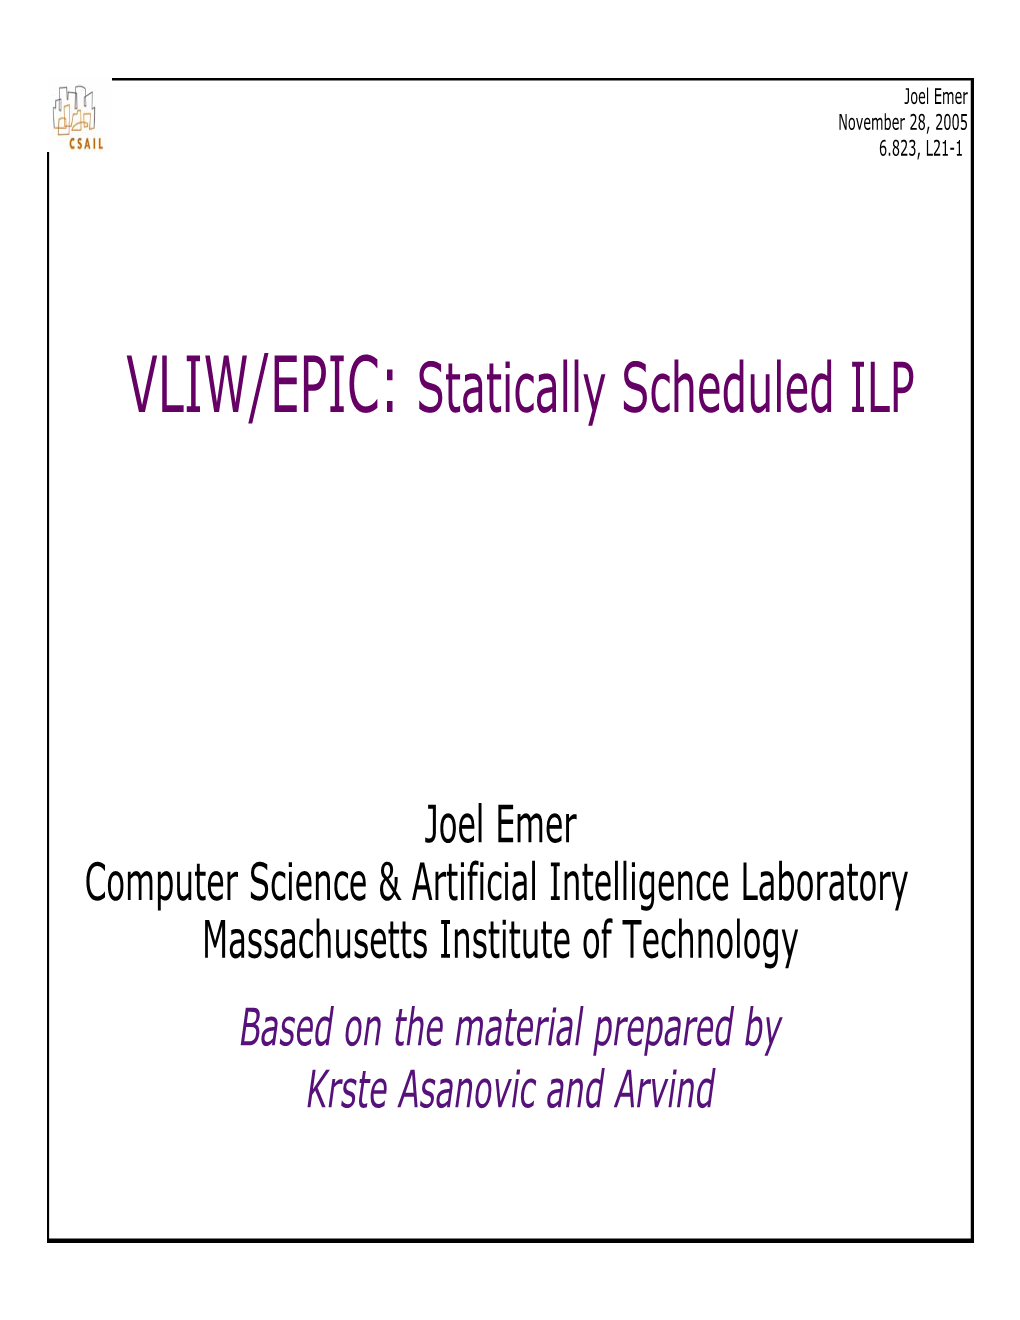 VLIW/EPIC: Statically Scheduled ILP